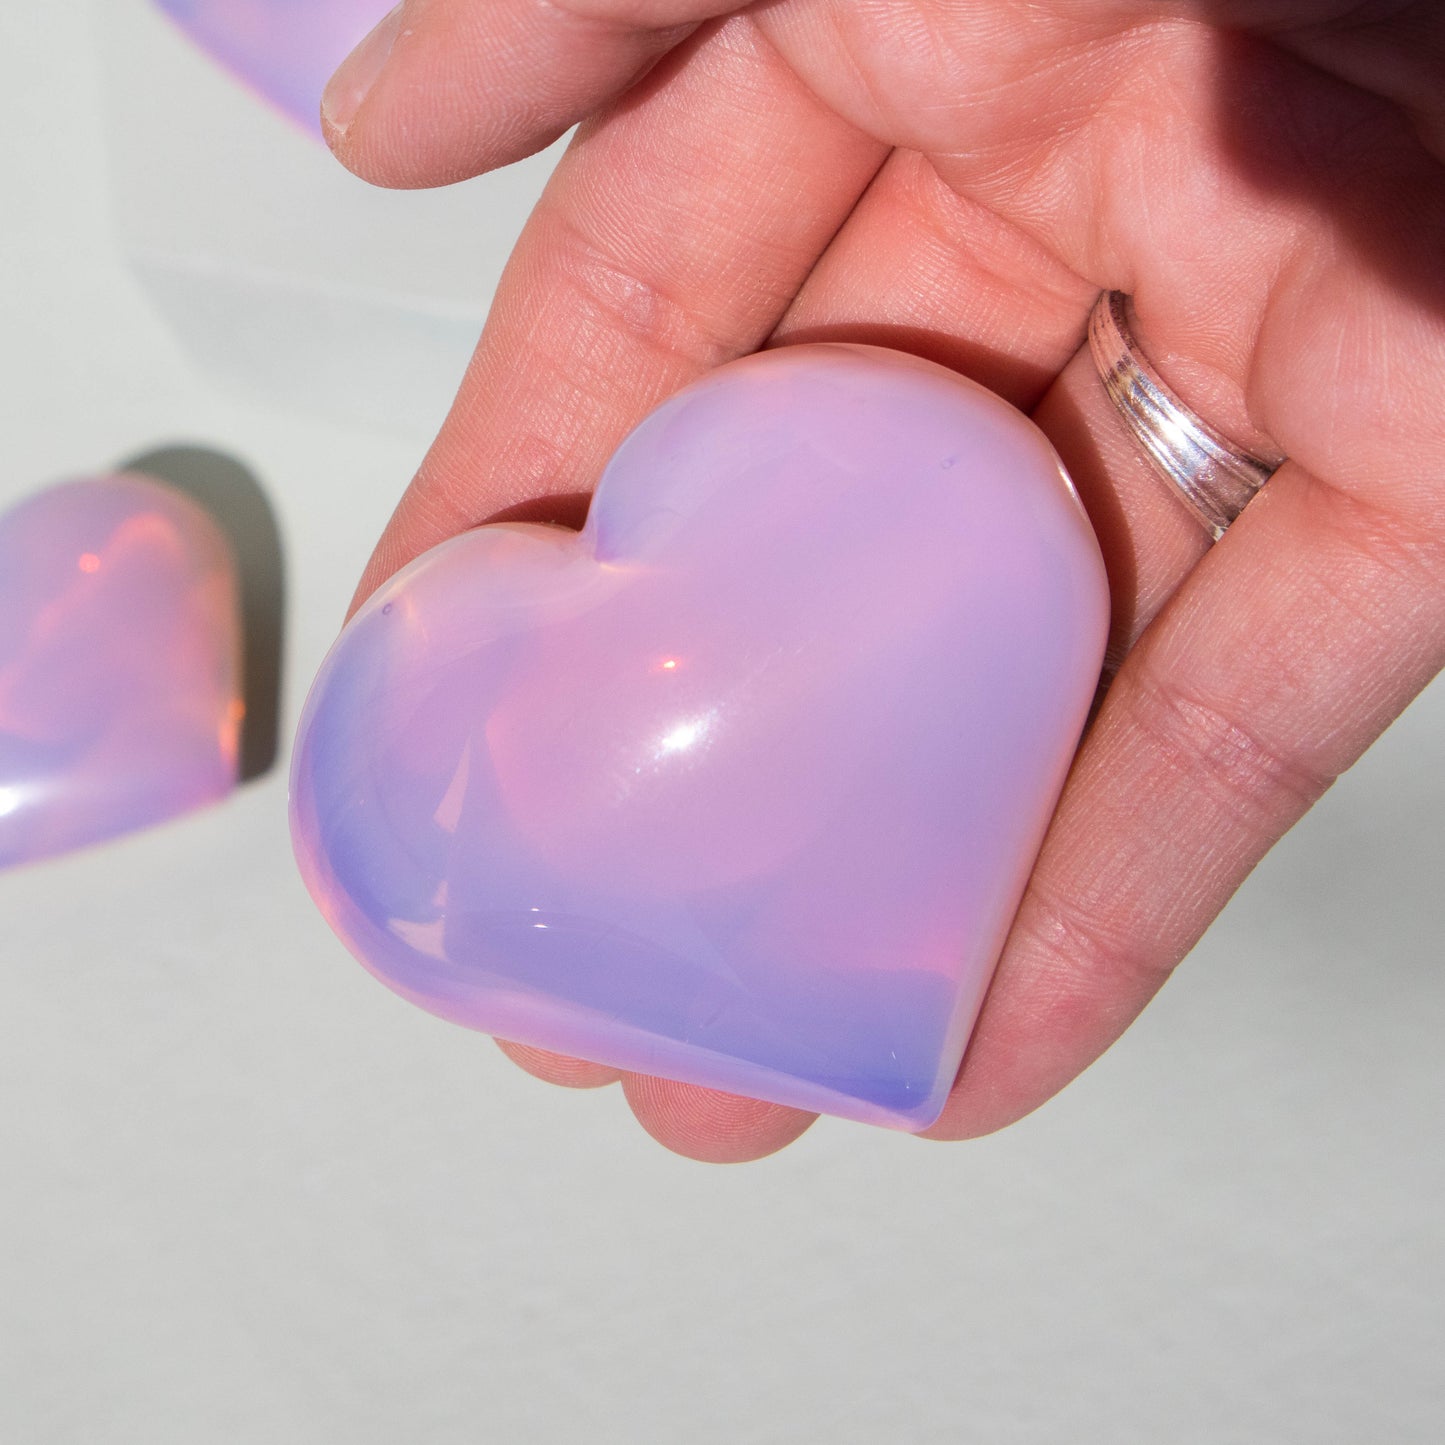 opalite, pink opalite, opalite heart, pink opalite heart, crystal heart, gemstone heart, opalite crystal, opalite stone, opalite properties, opalite healing properties, opalite metaphysical properties, opalite meaning